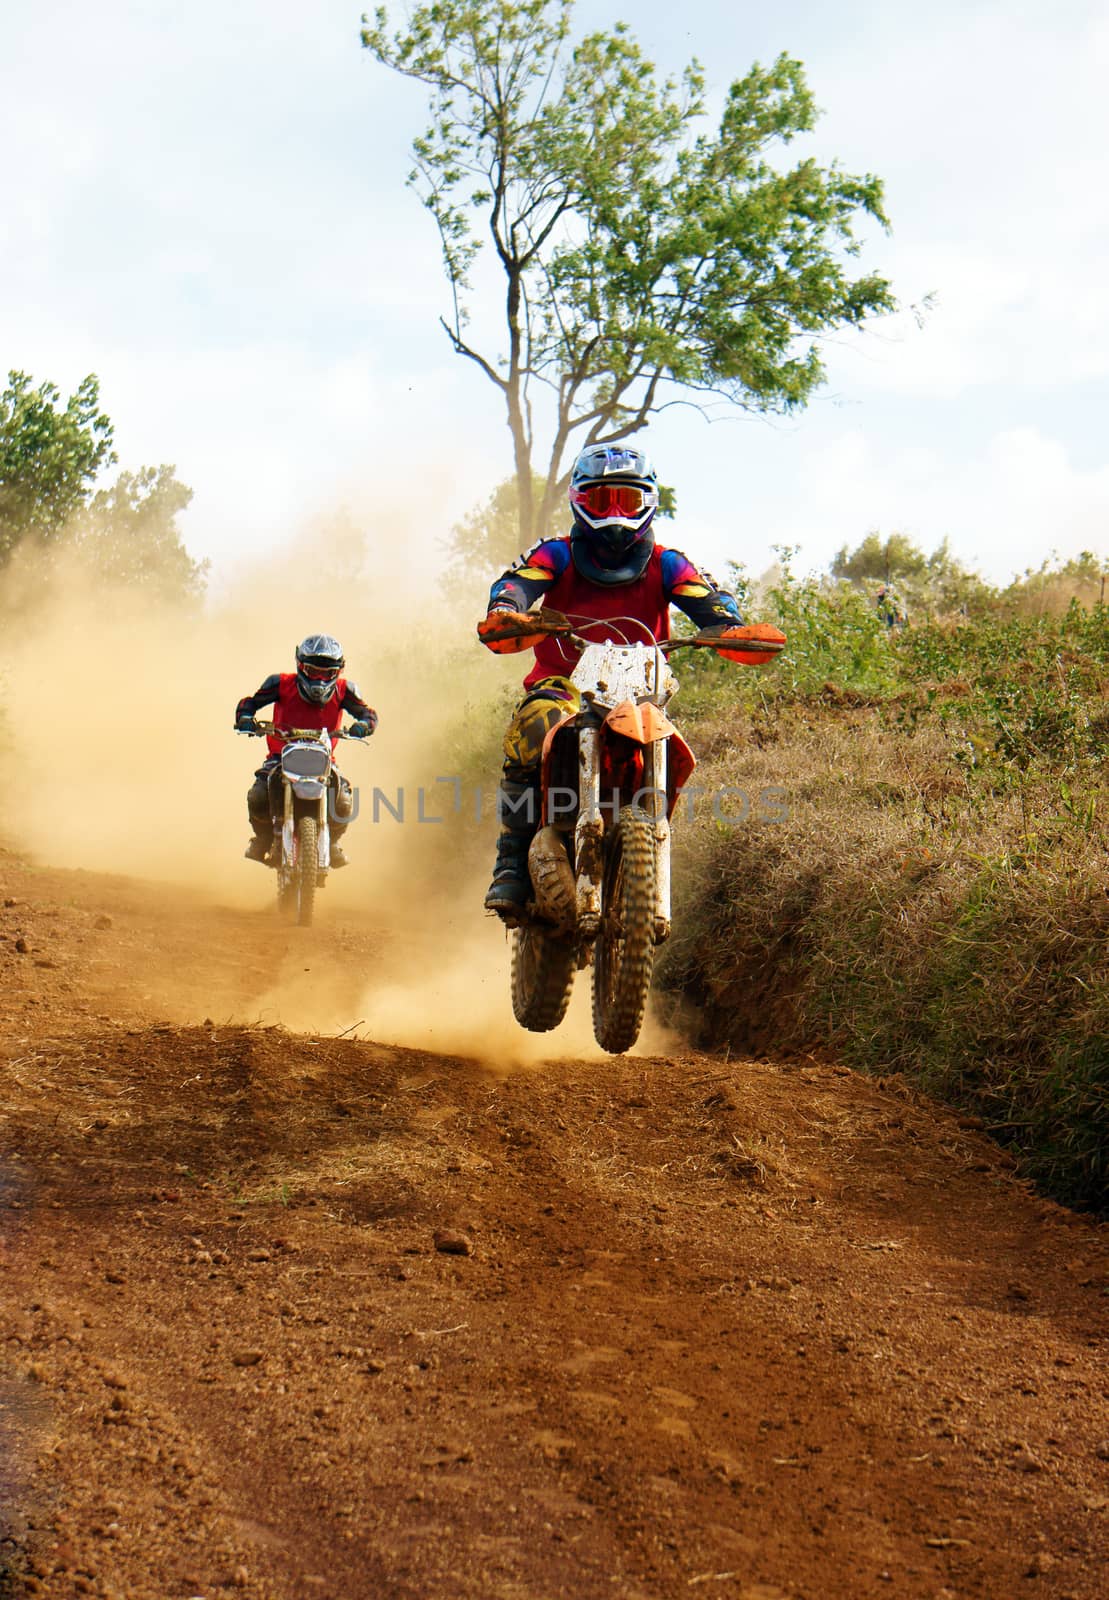 The motorcycle race hole on December at Dambri waterfall, motorcyclist try to speed up goal, red soil way, indistinct dust